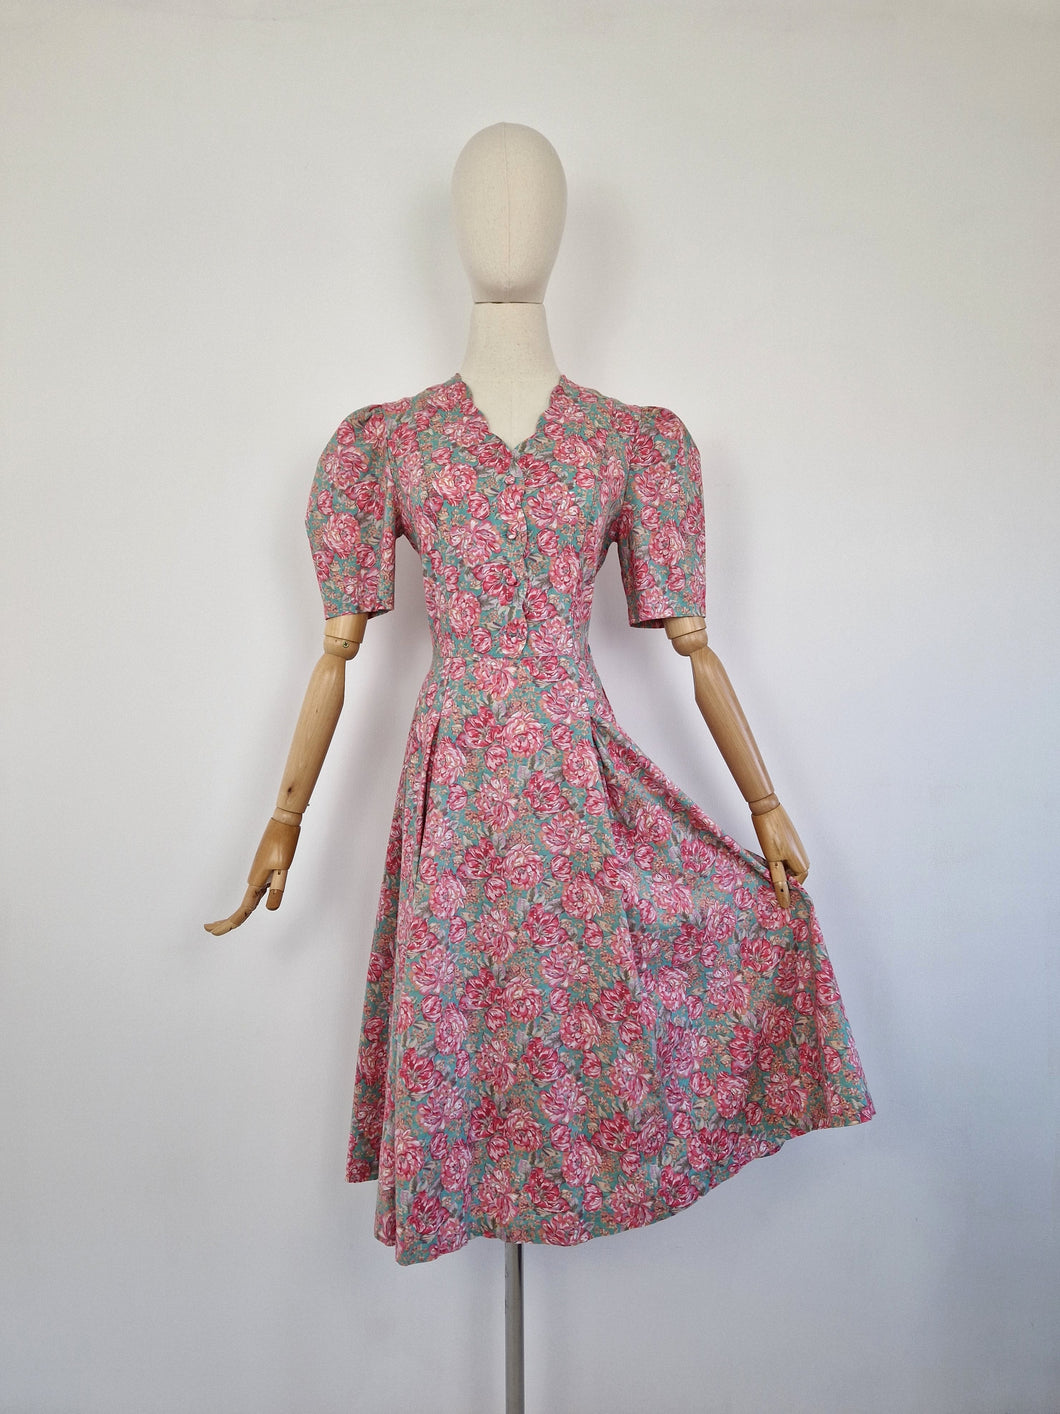 Vintage 80s Laura Ashley pink and green dress